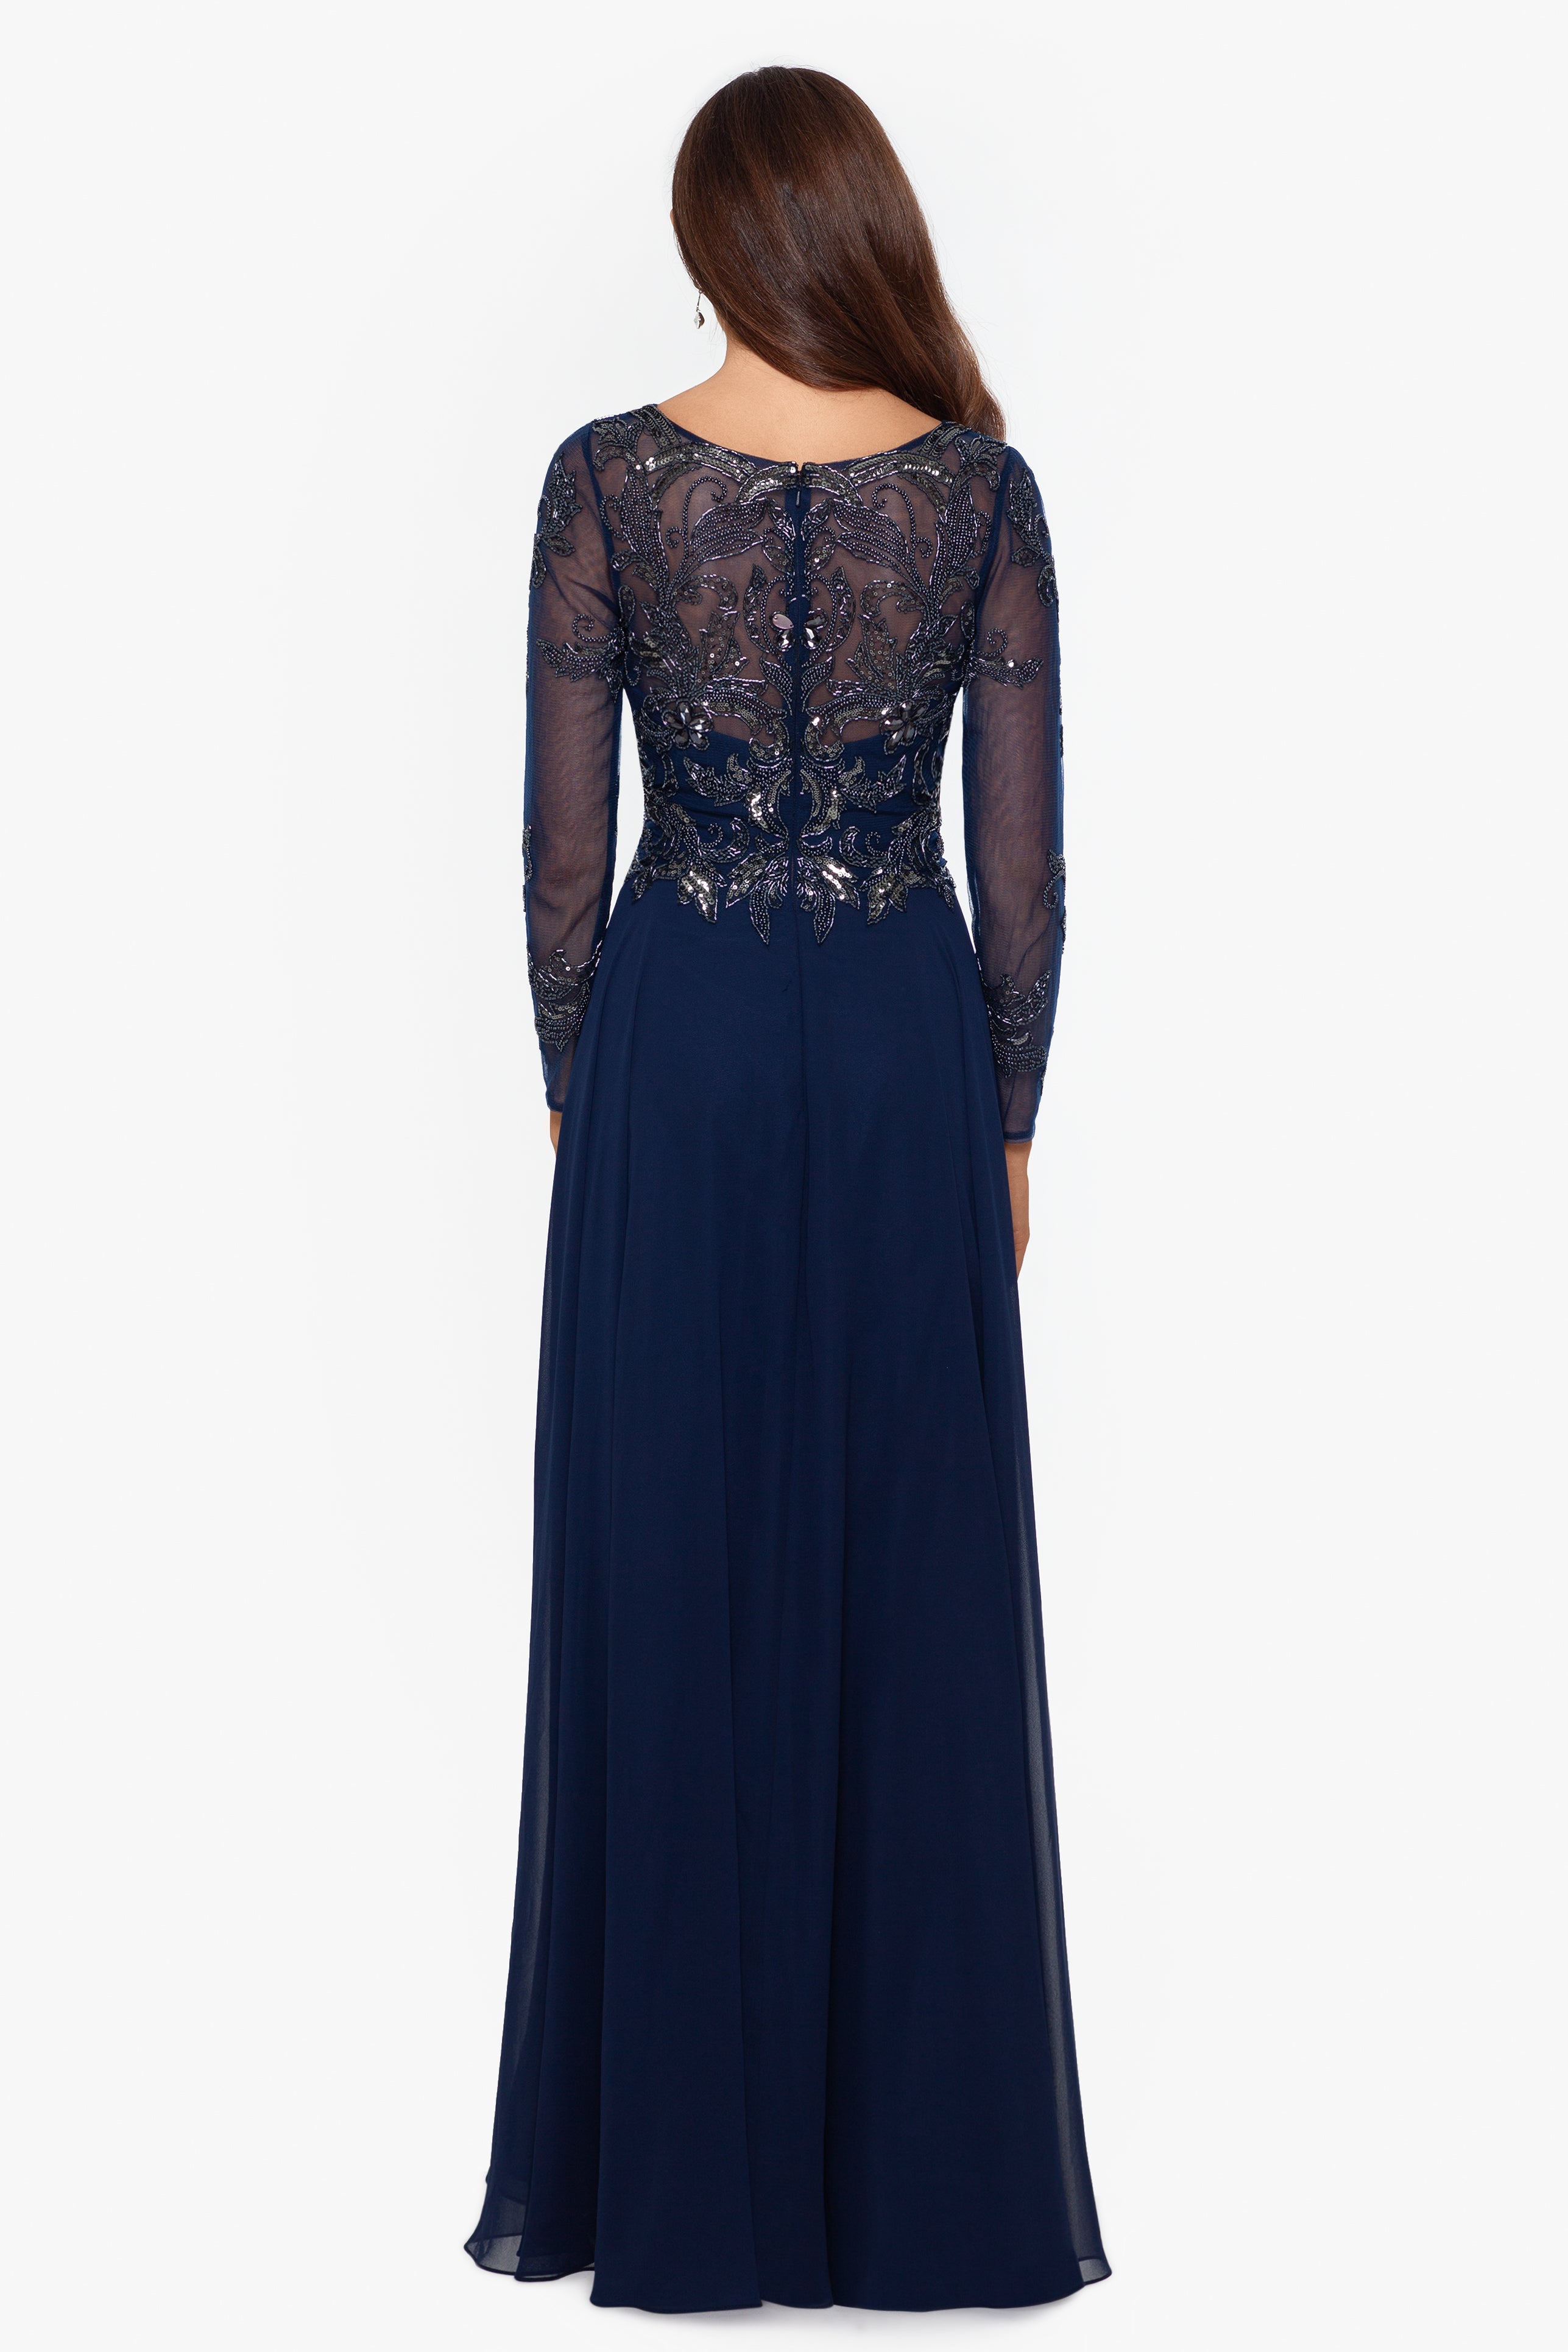 Navy Blue Color Georgette With Embroidery Sequence work Gown |Engagement  Wear | Modest evening dress, Floral maxi dress, Full gown